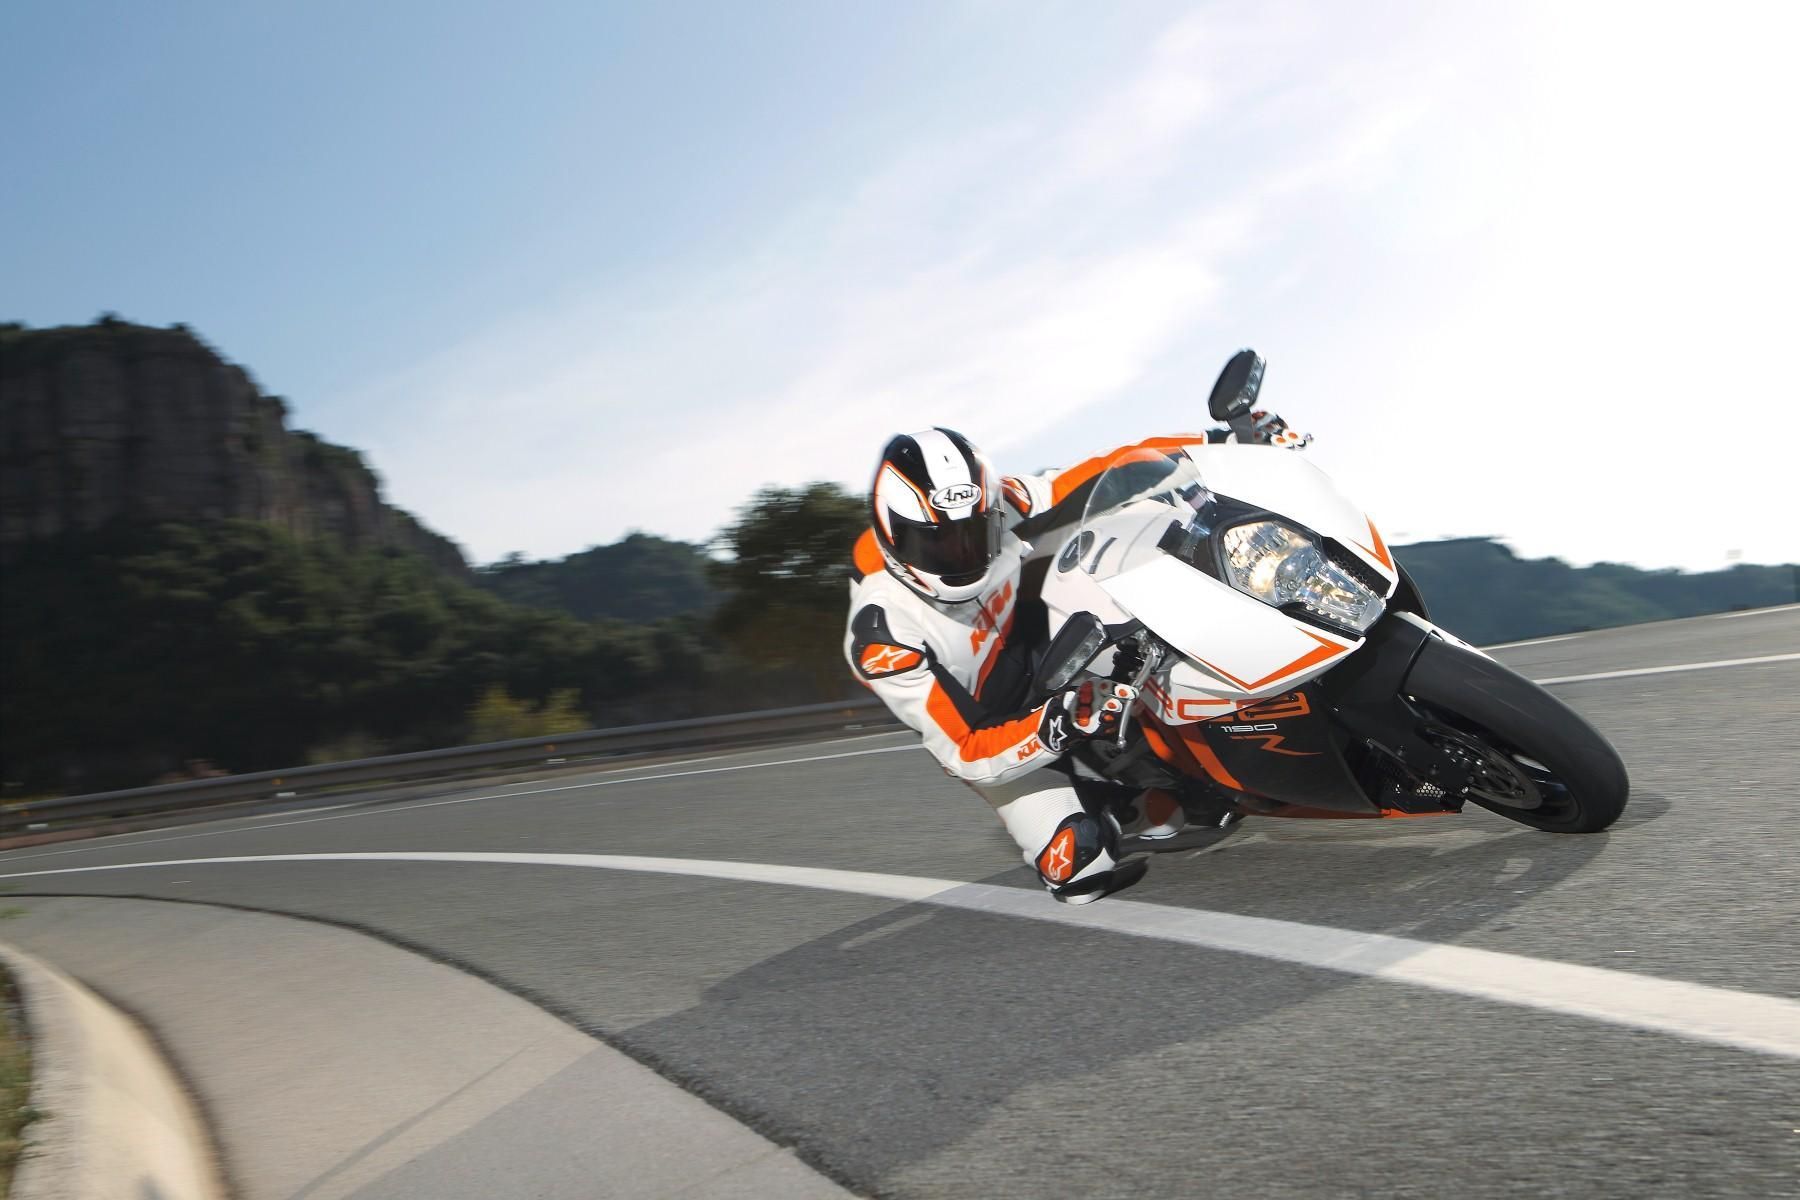 2013 KTM 1190 RC8 R in action 2